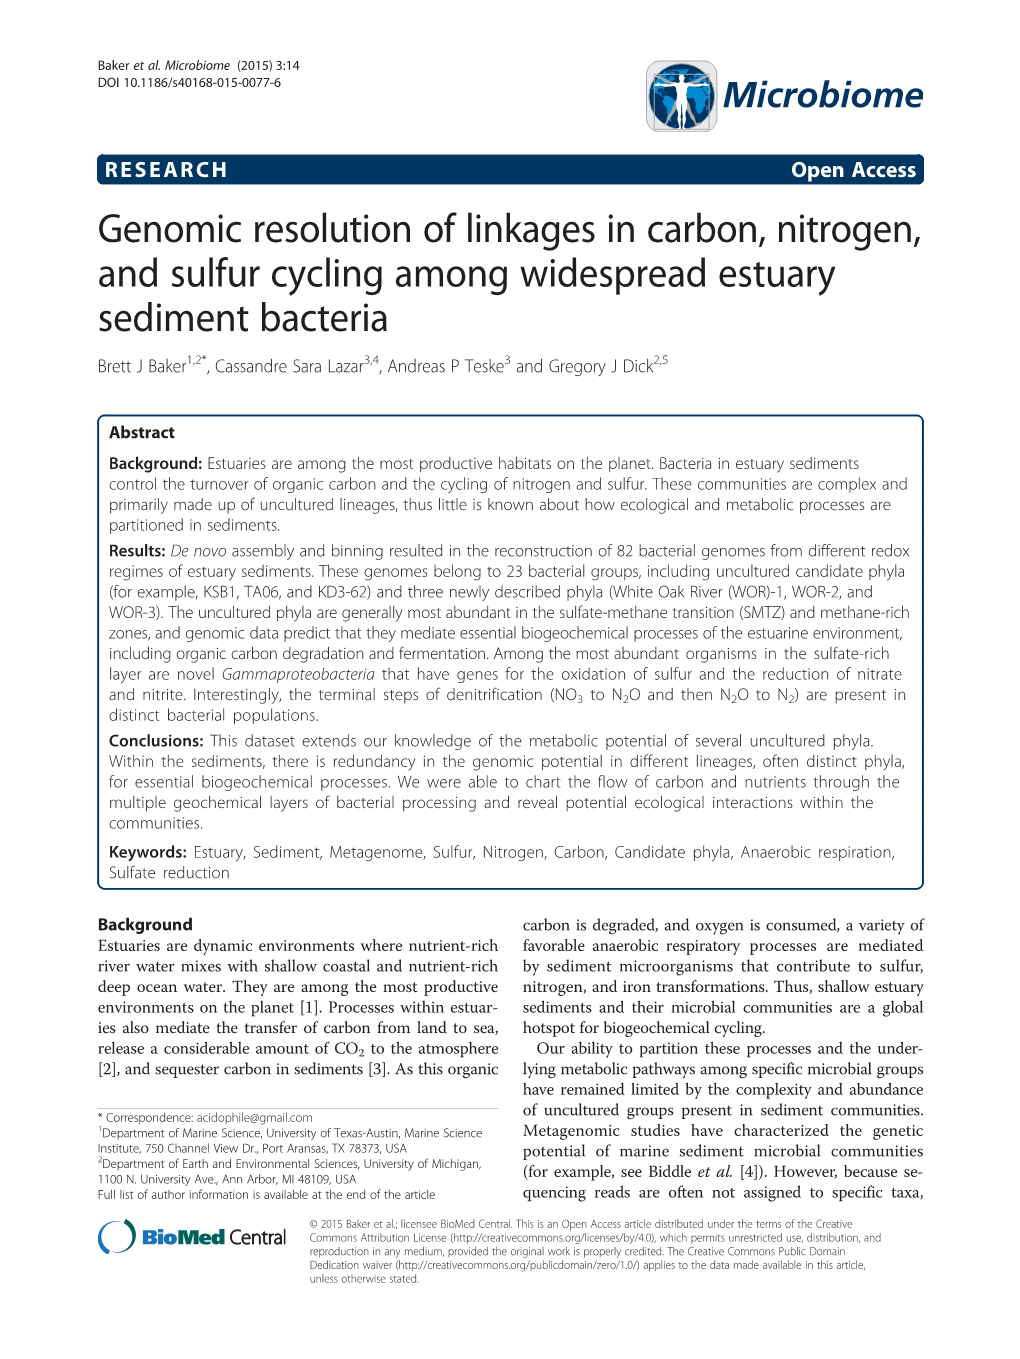 Genomic Resolution of Linkages in Carbon, Nitrogen, and Sulfur Cycling